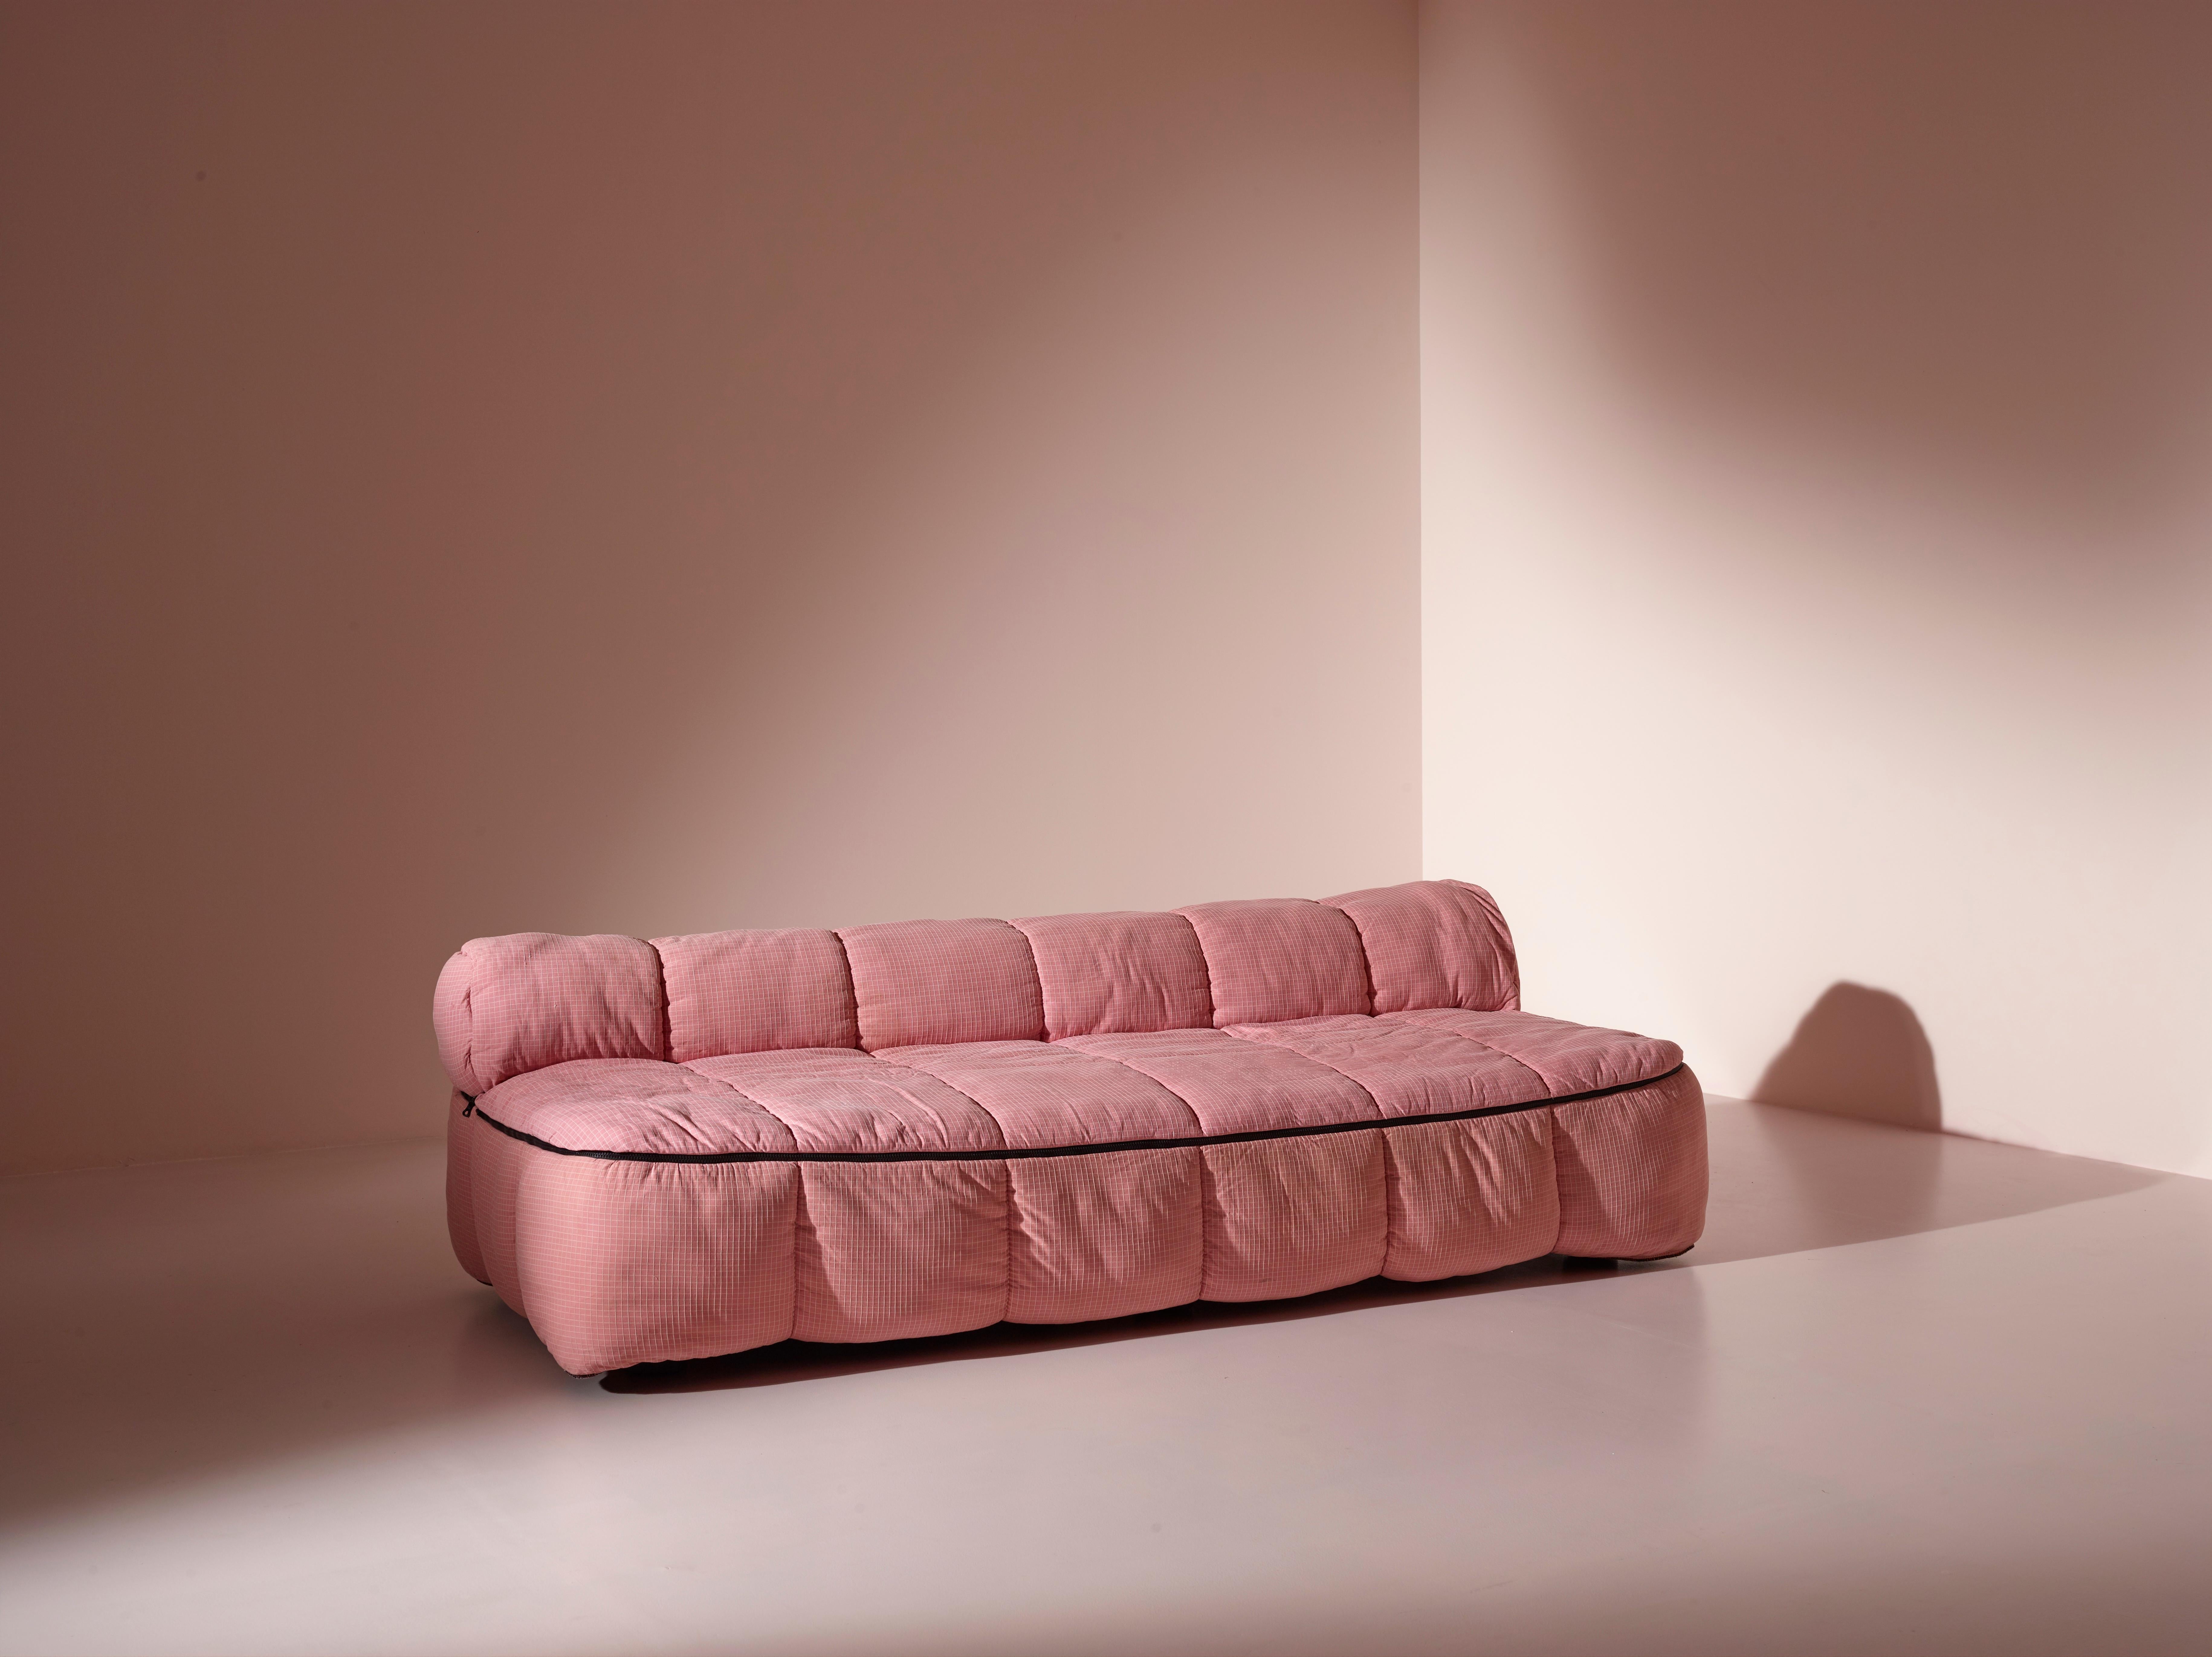 A beautiful daybed/two seater sofa from the Strips series by Cini Boeri for Arflex.
This series is a modular seating system composed of individual cushions that can be arranged in a variety of configurations to create different seating